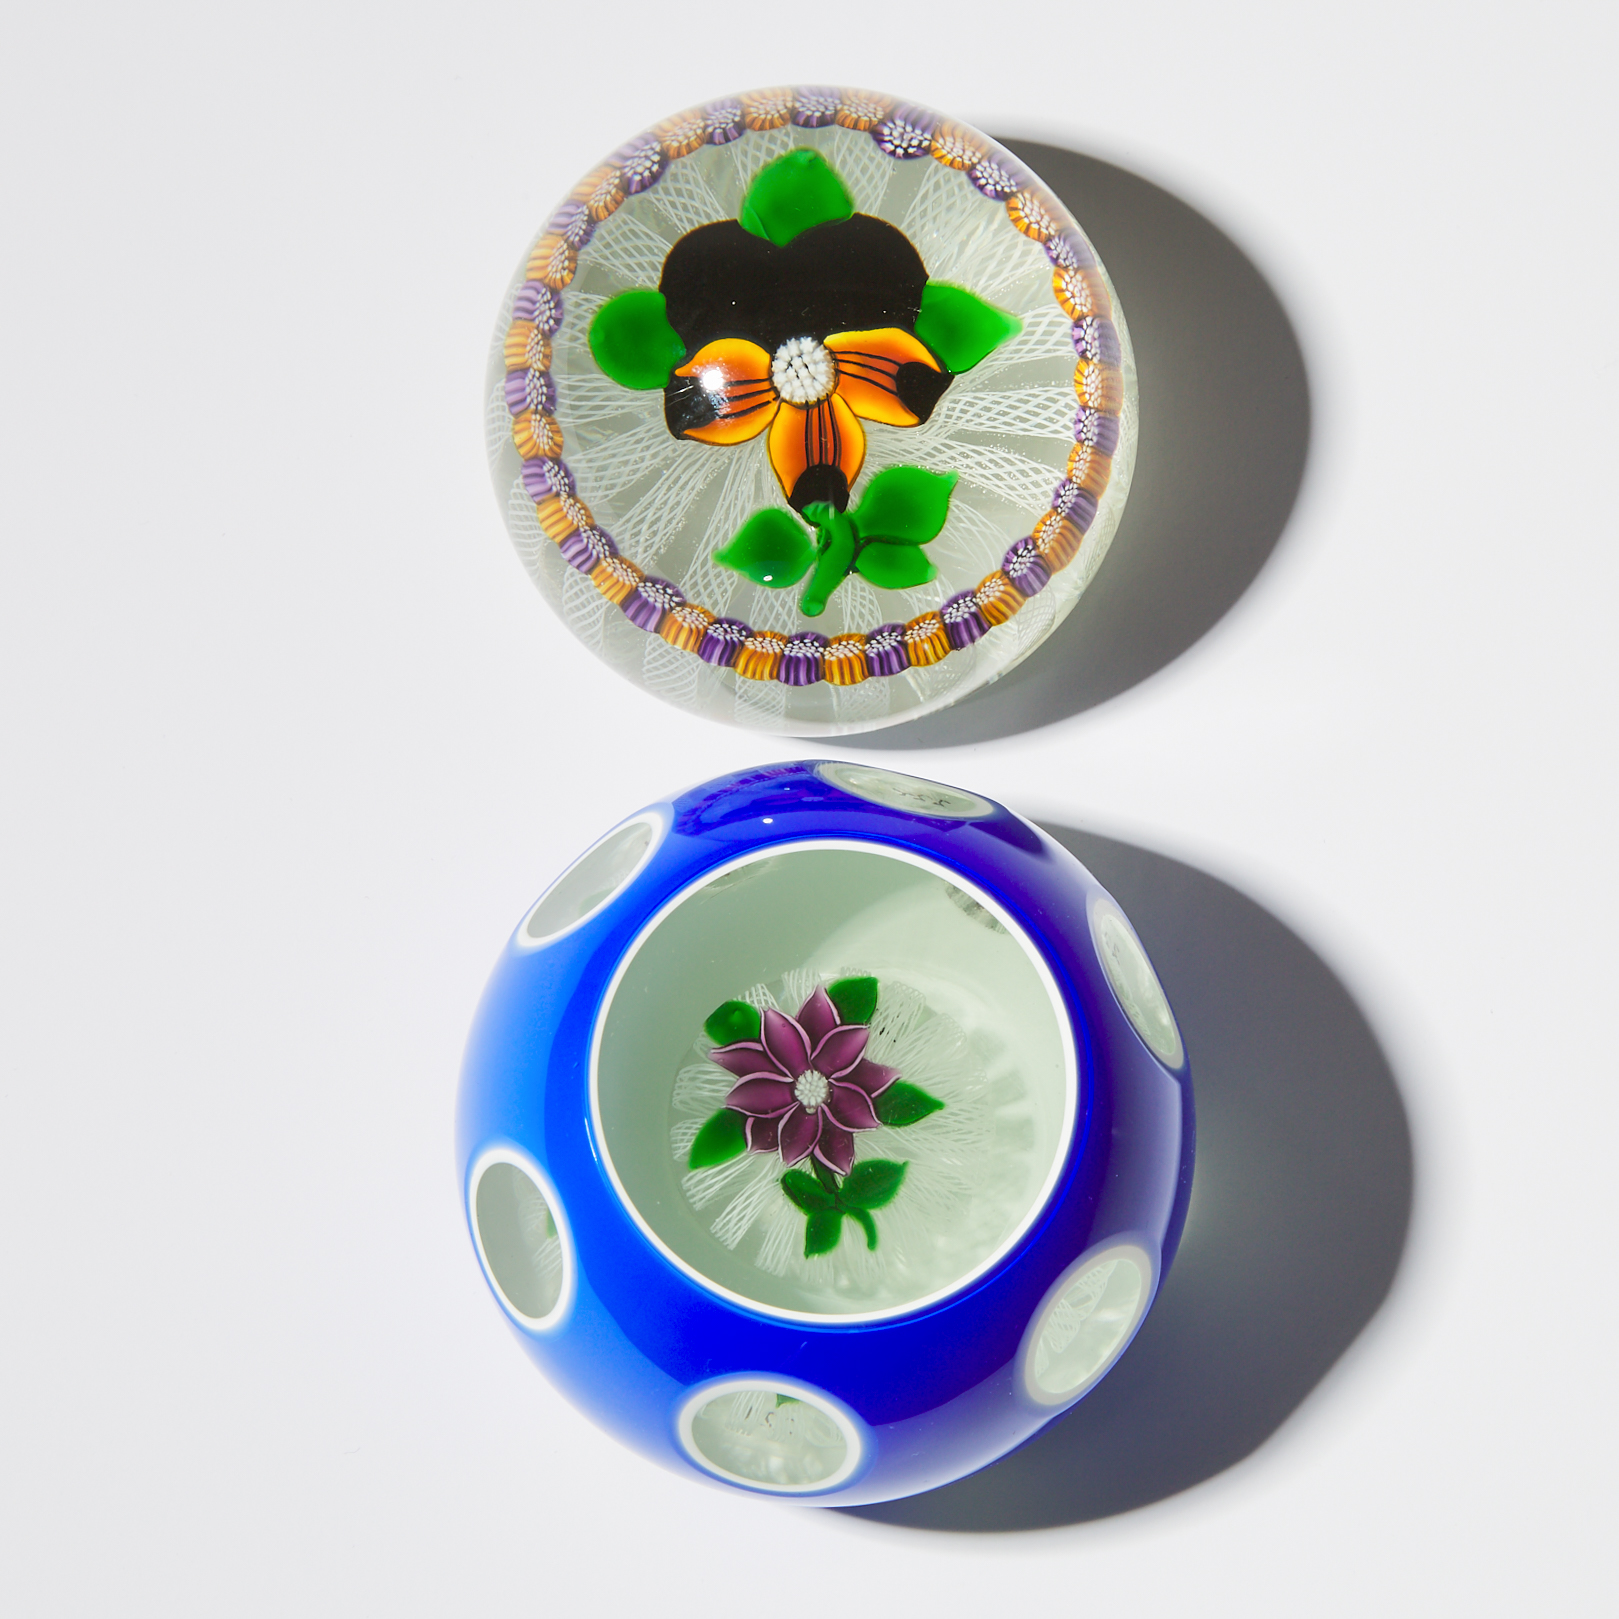 John Deacons (Scottish, b. 1950), Double Overlay and Pansy Glass Paperweights, 1998